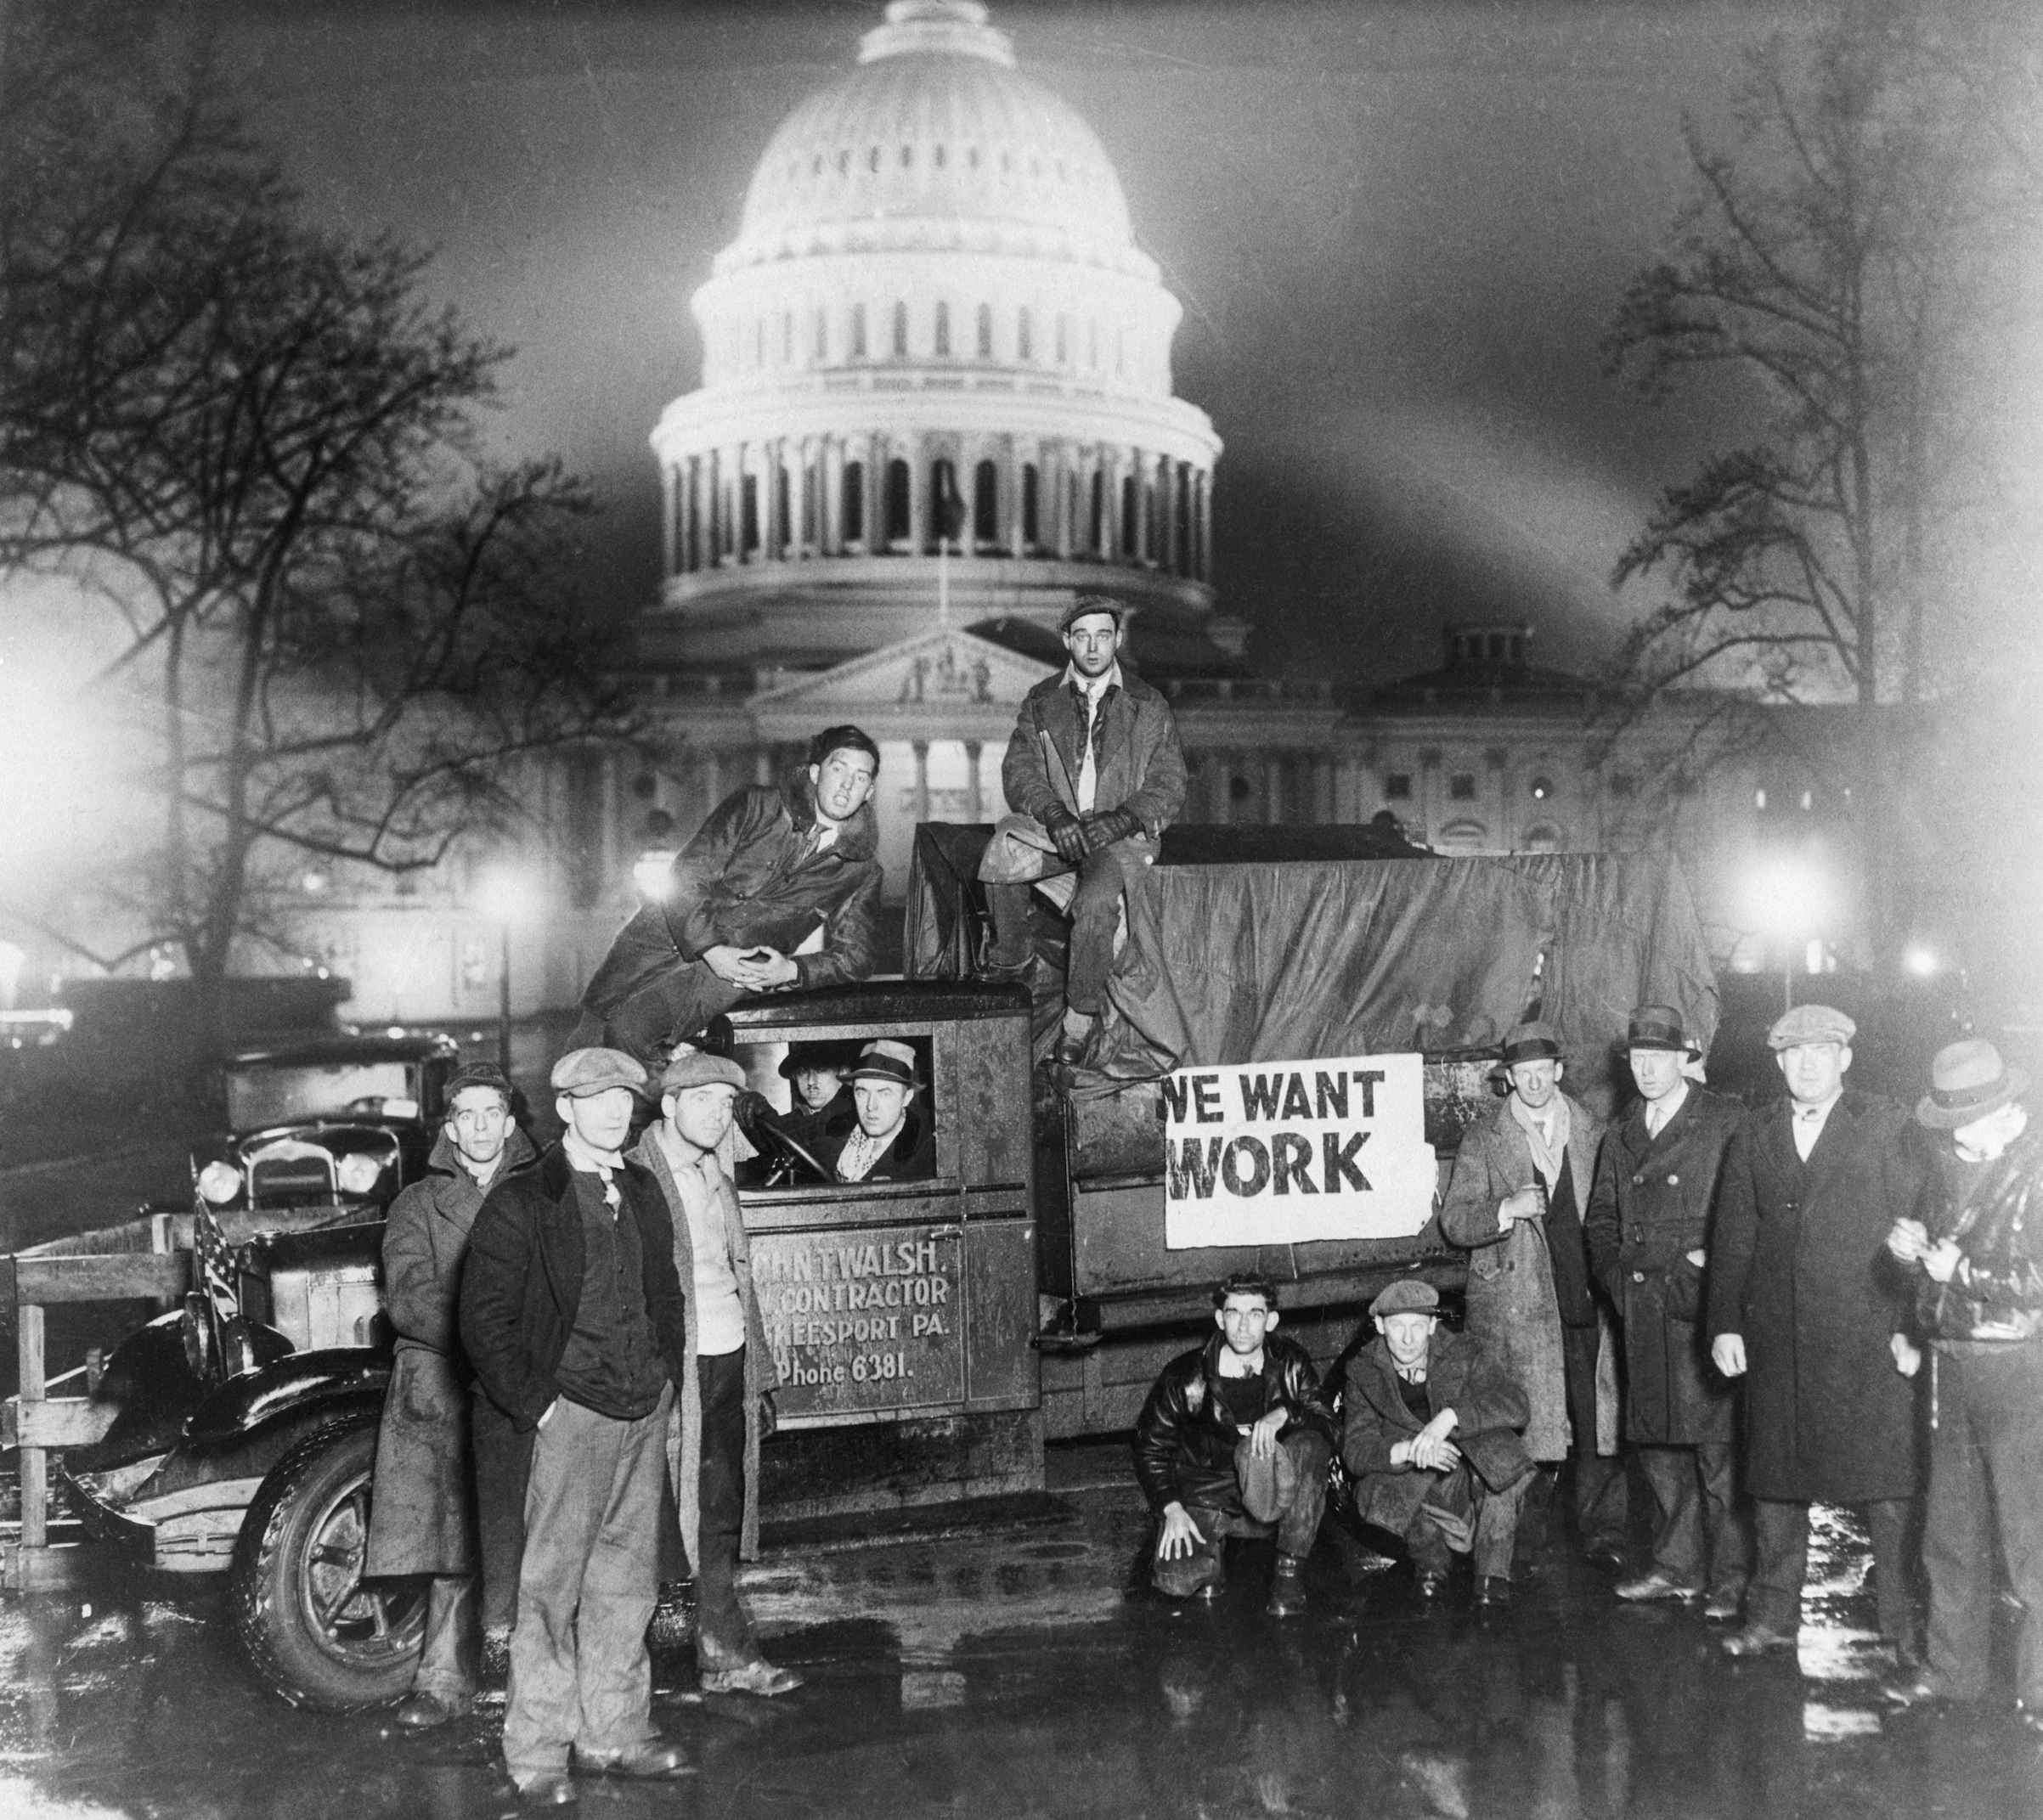 Truckload of Unemployed Men at the White House